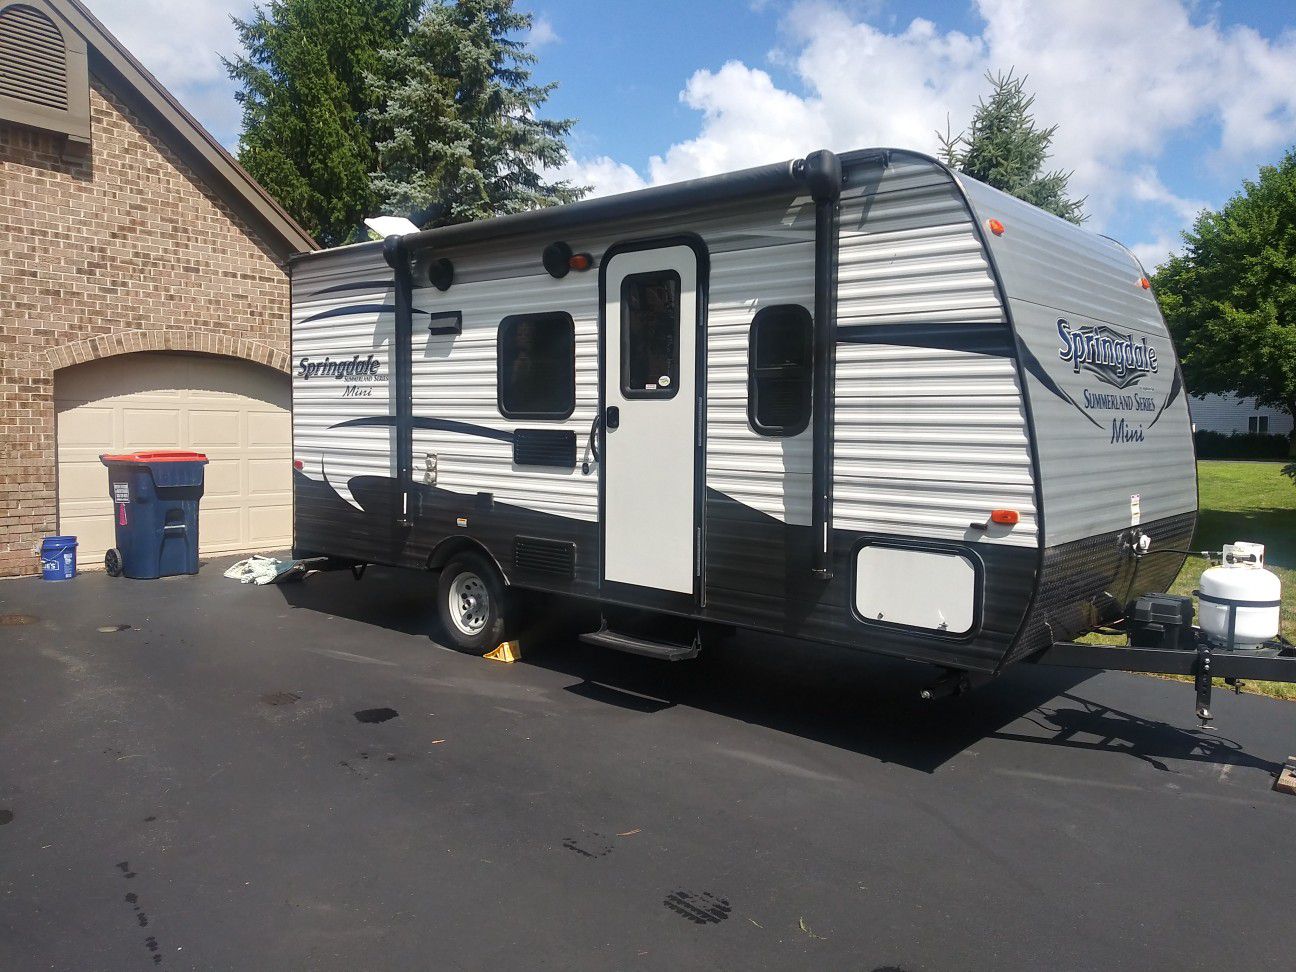 2017 Travel Camper Trailer - must see!!! $11,600. .. 18 ft. . IMMACULATE cond. 1 owner. GREAT Deal!